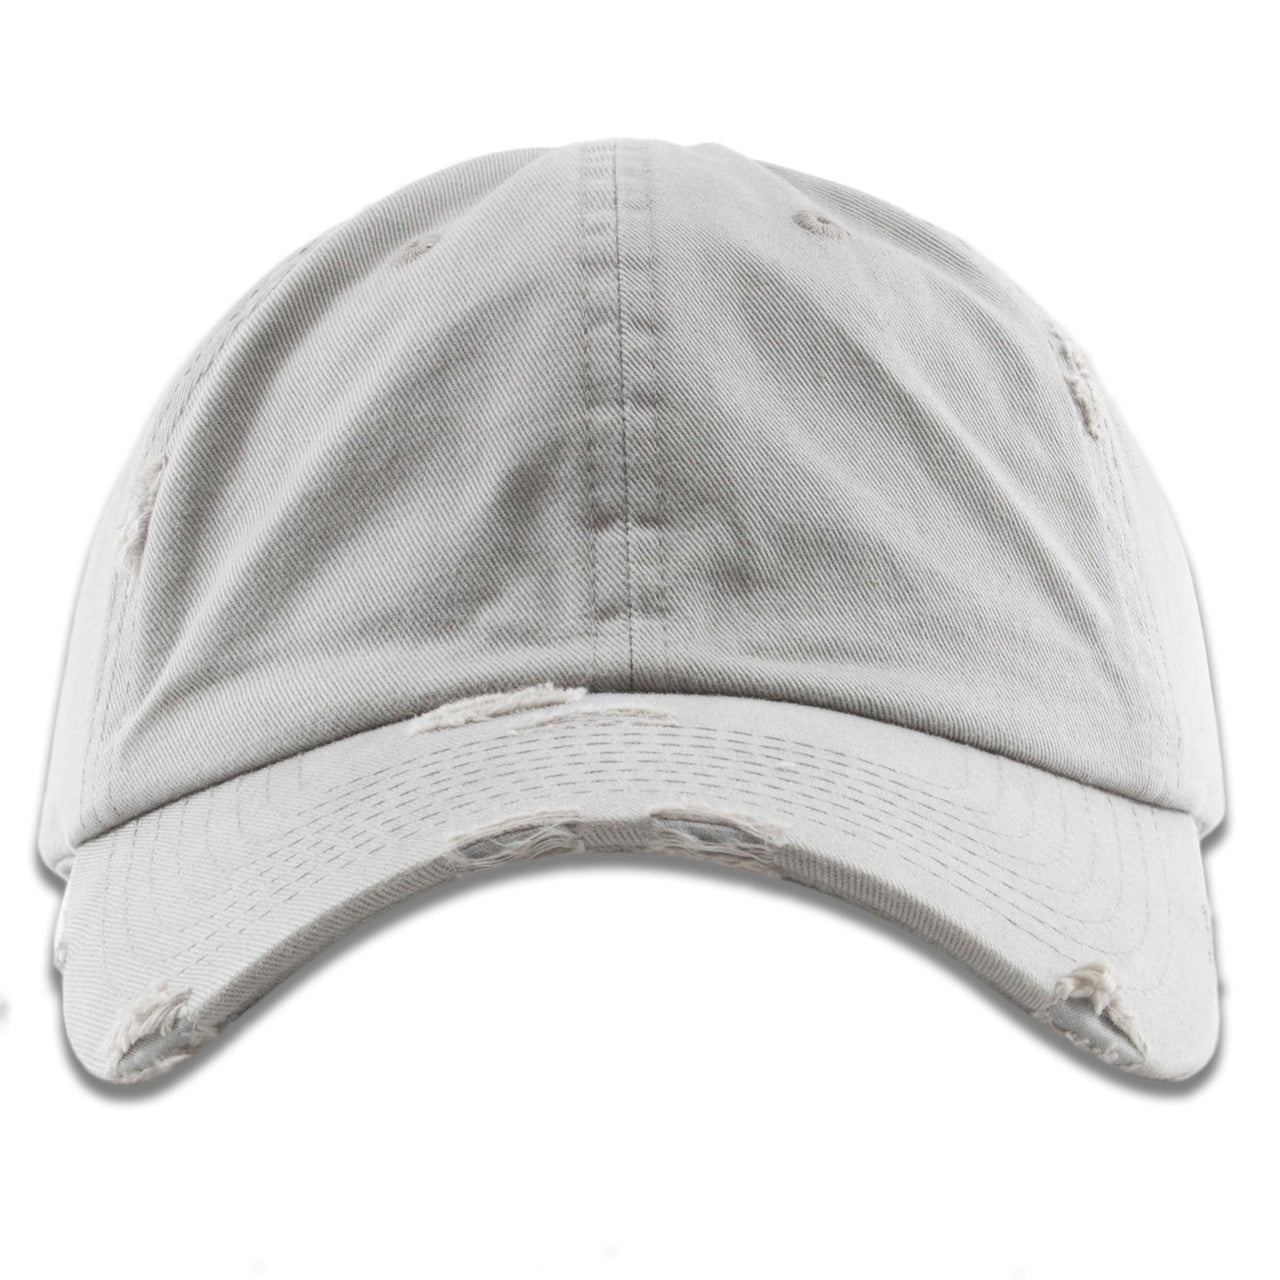 The light gray distressed blank baseball cap has a soft unstructured crown and a bent brim